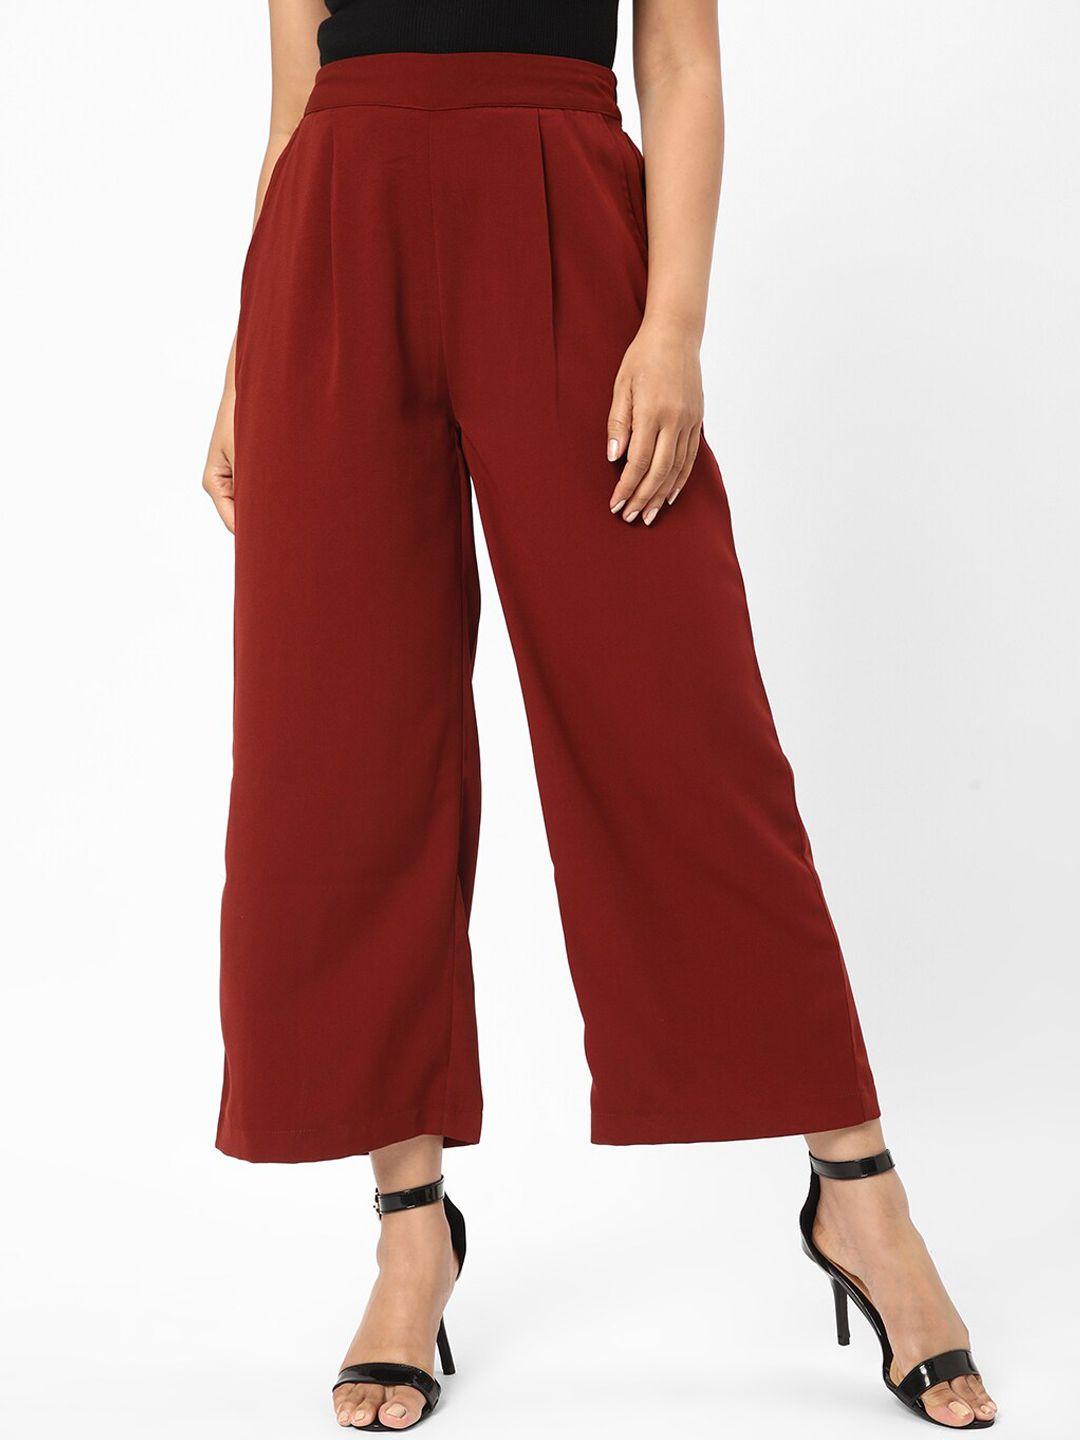 r&b women flared fit culottes trousers